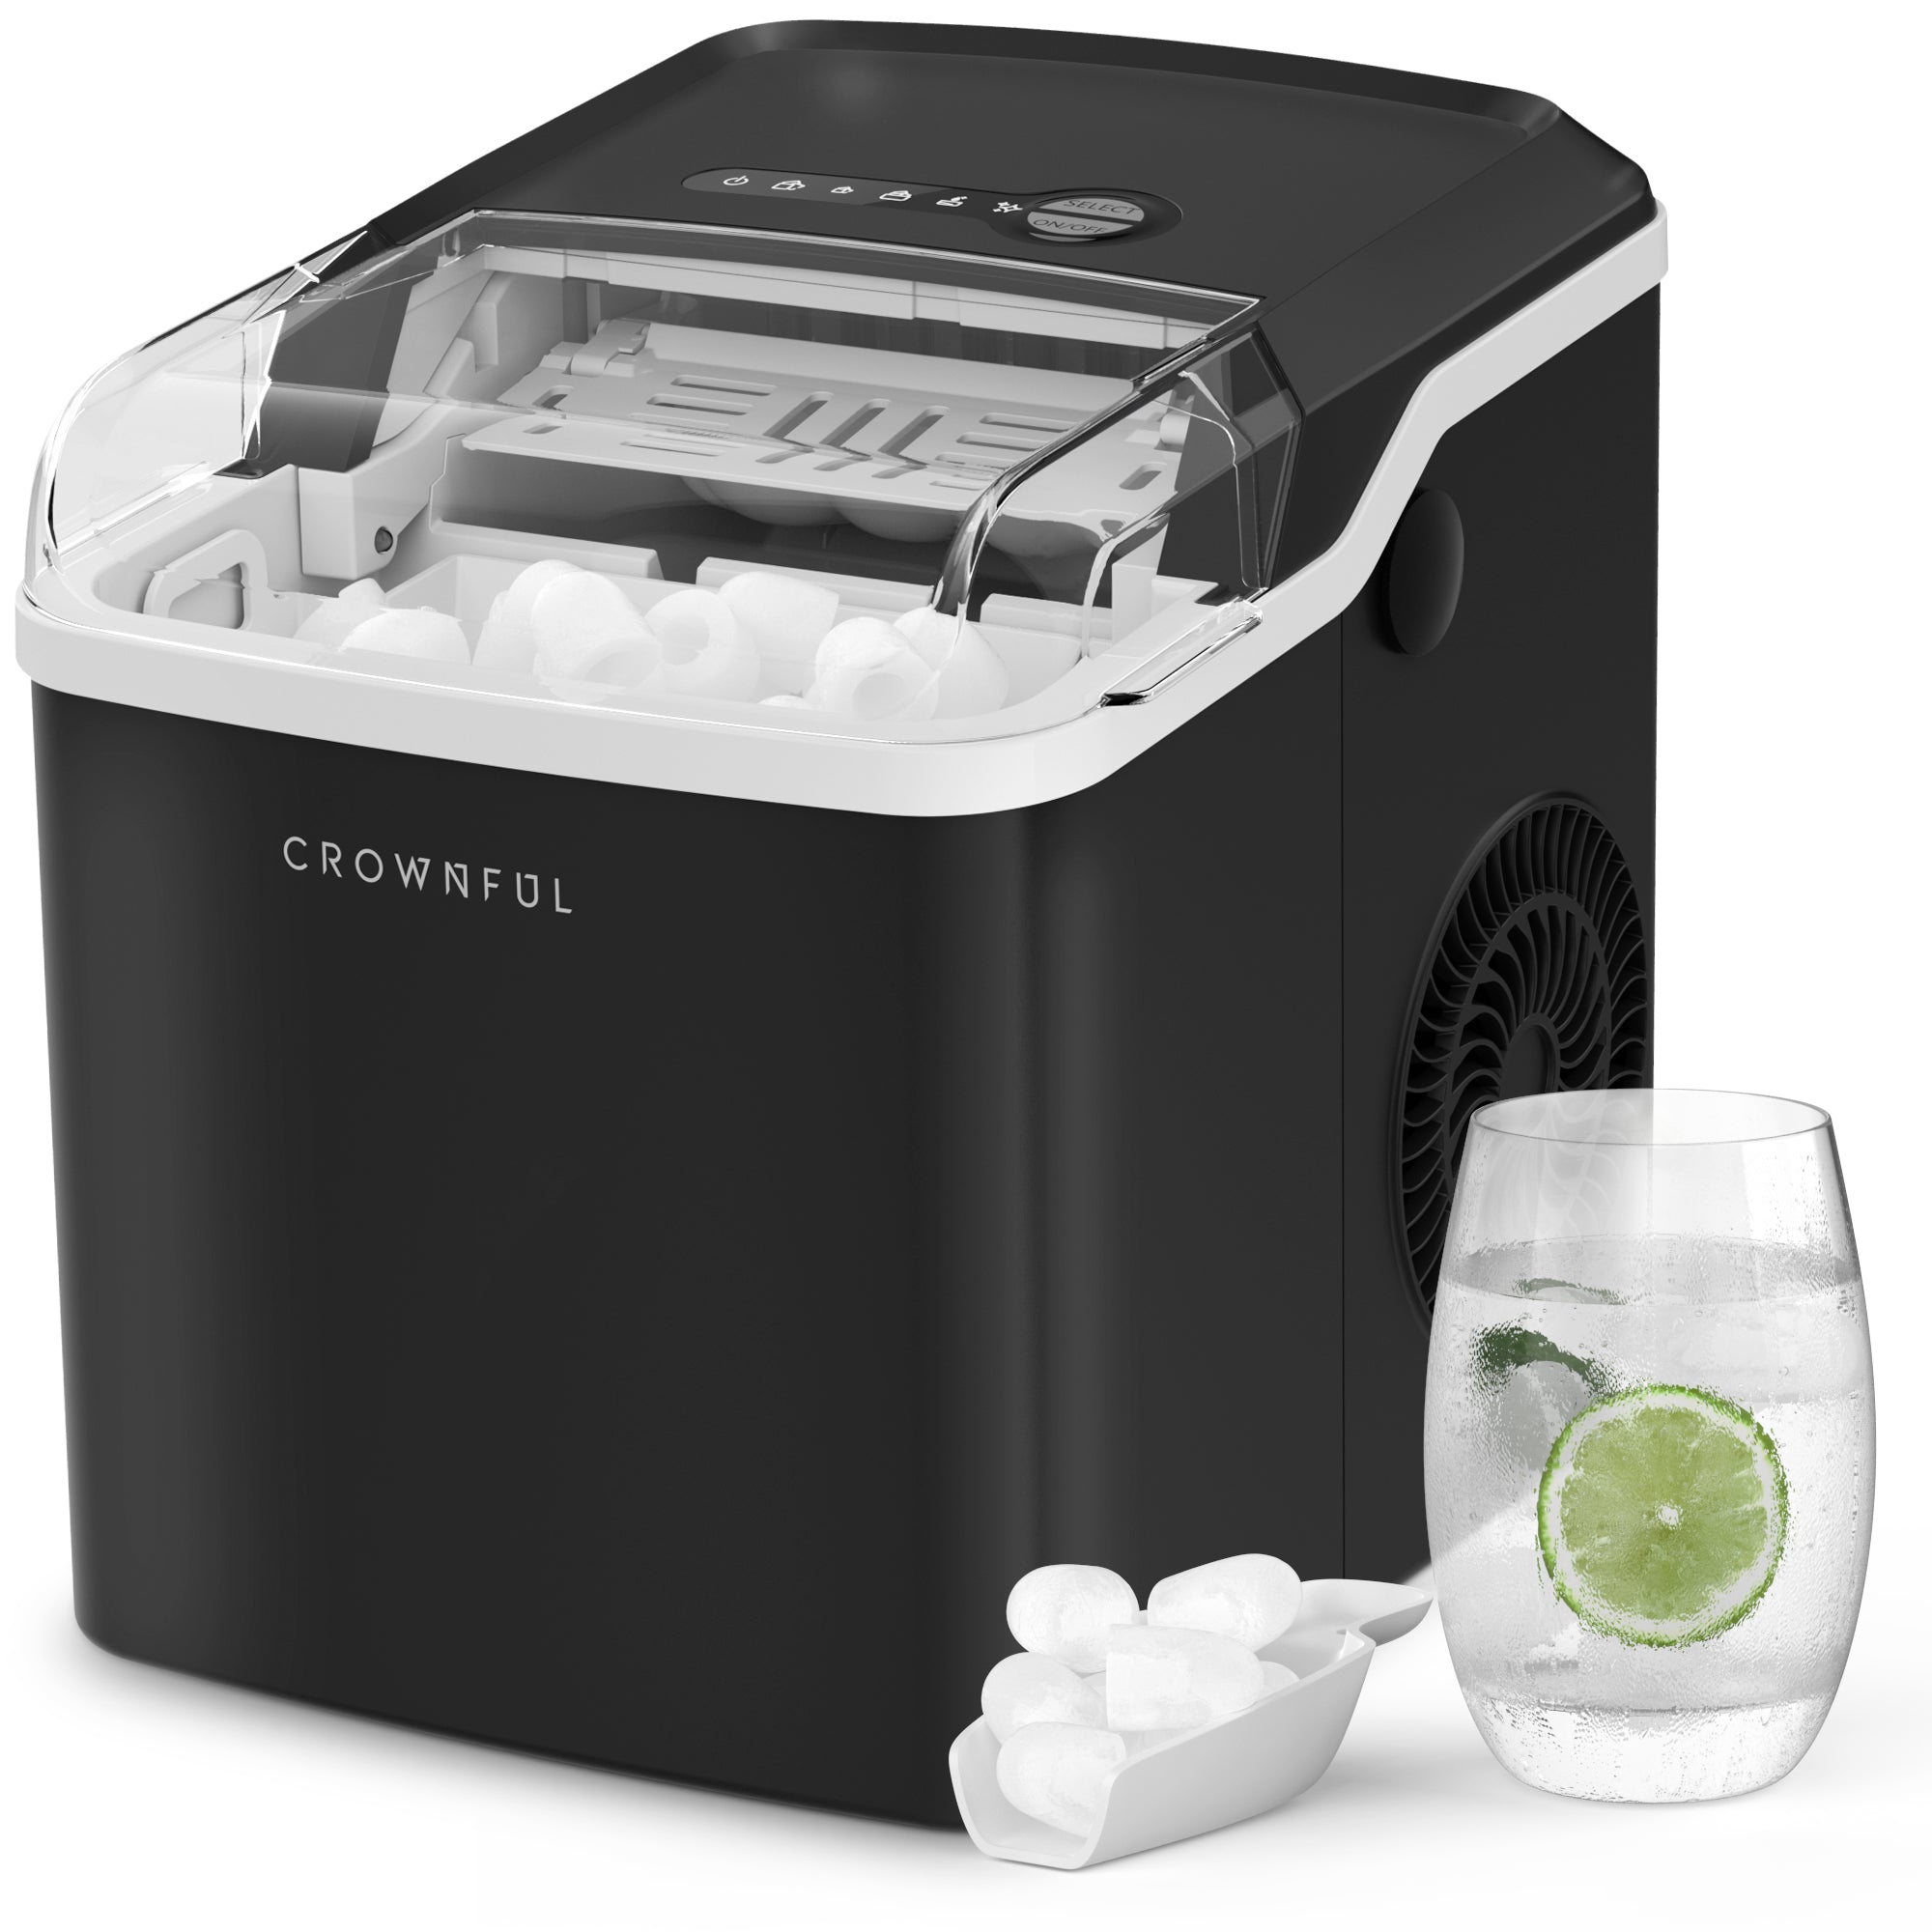 CROWNFUL Portable Countertop Ice Maker Machine - household items - by owner  - housewares sale - craigslist